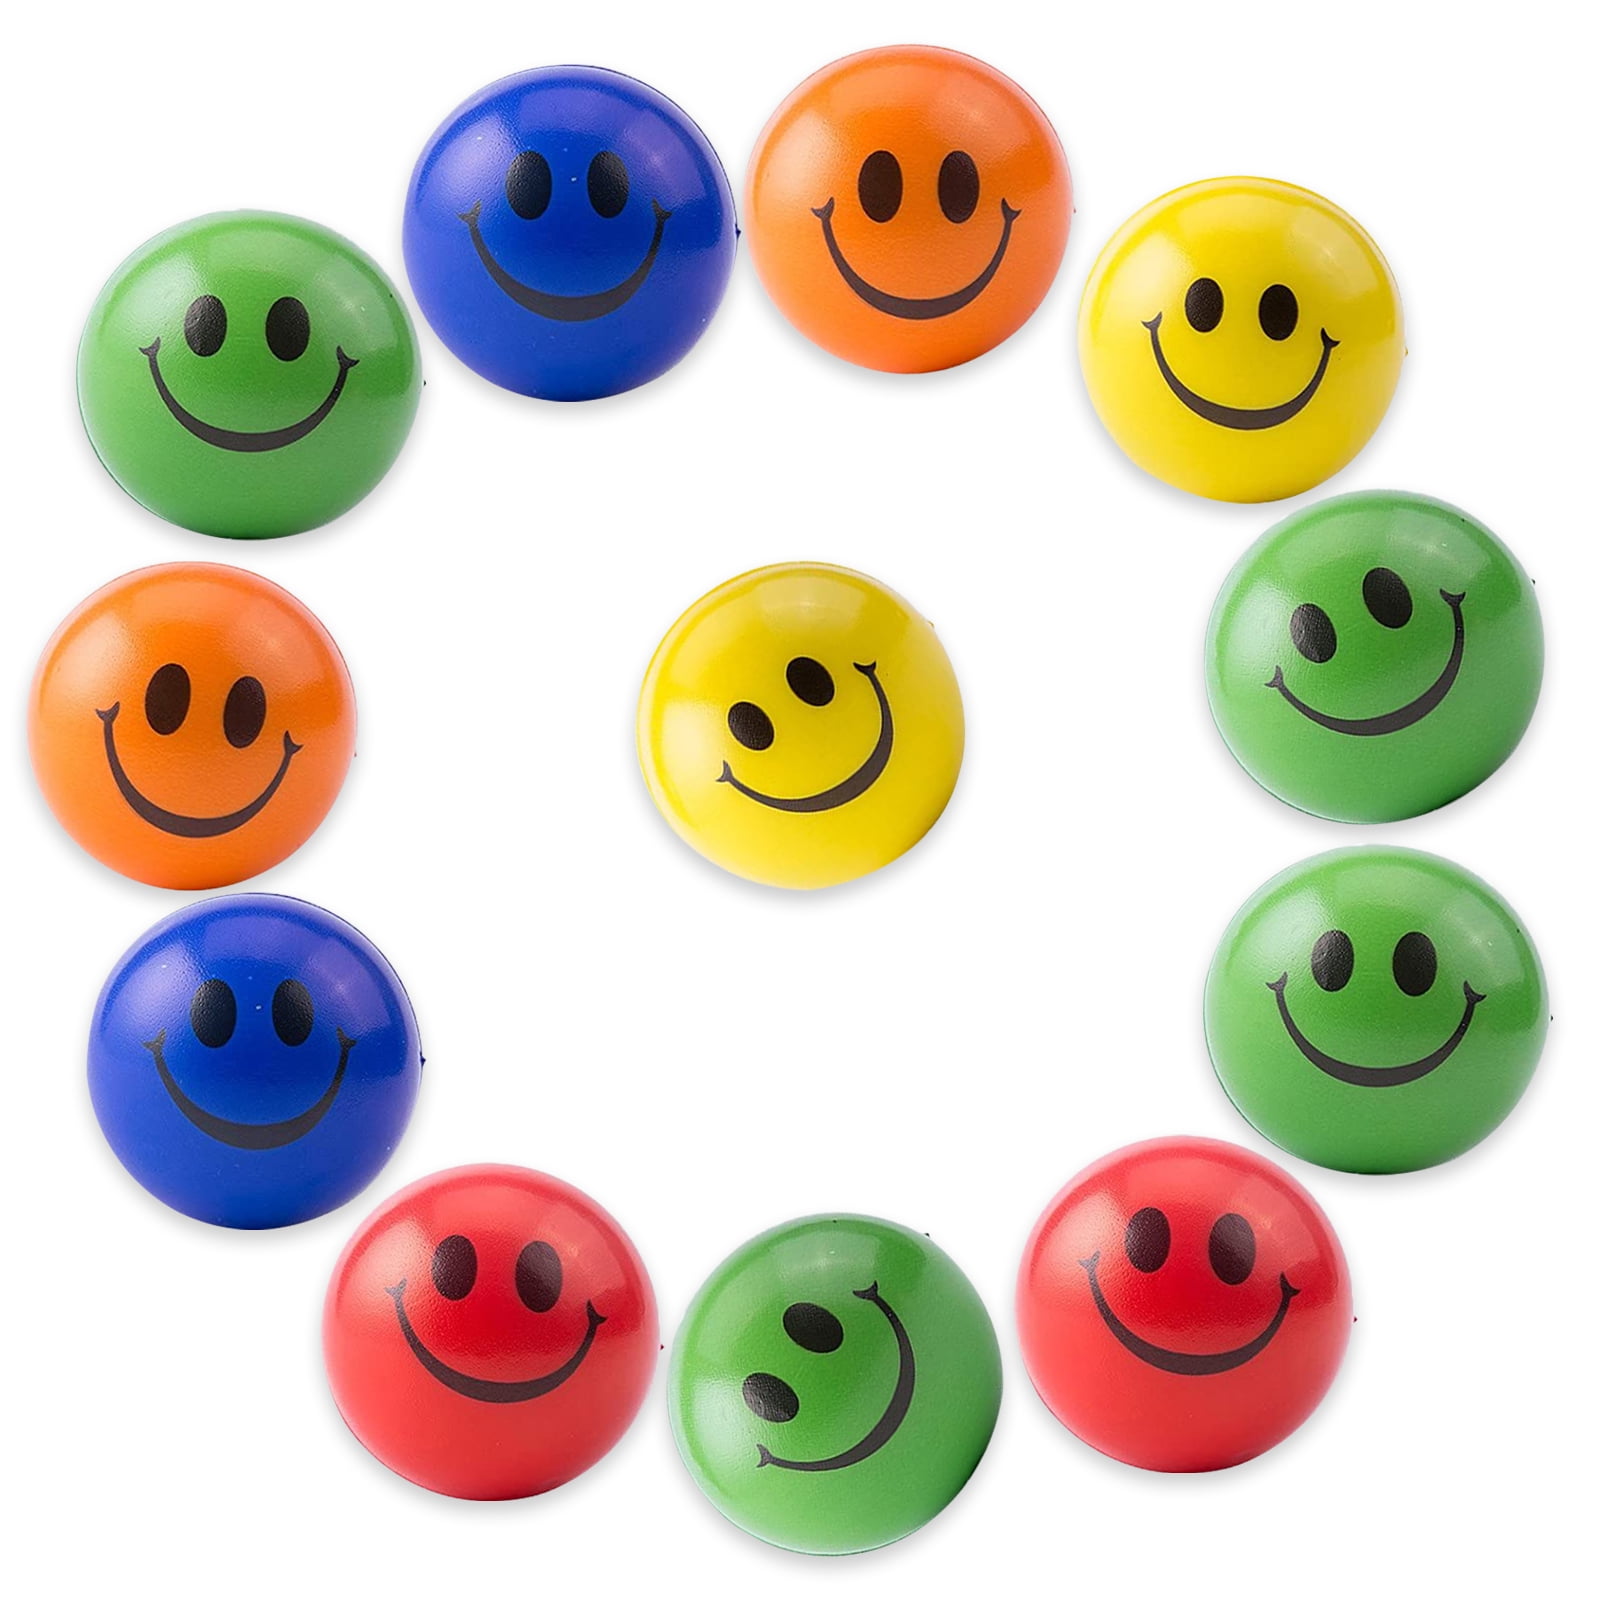 25 SMILE SMILEY FACE STRESS RELIEF BALLS 2" FOAM HAND THERAPY SQUEEZE TOY BALL 